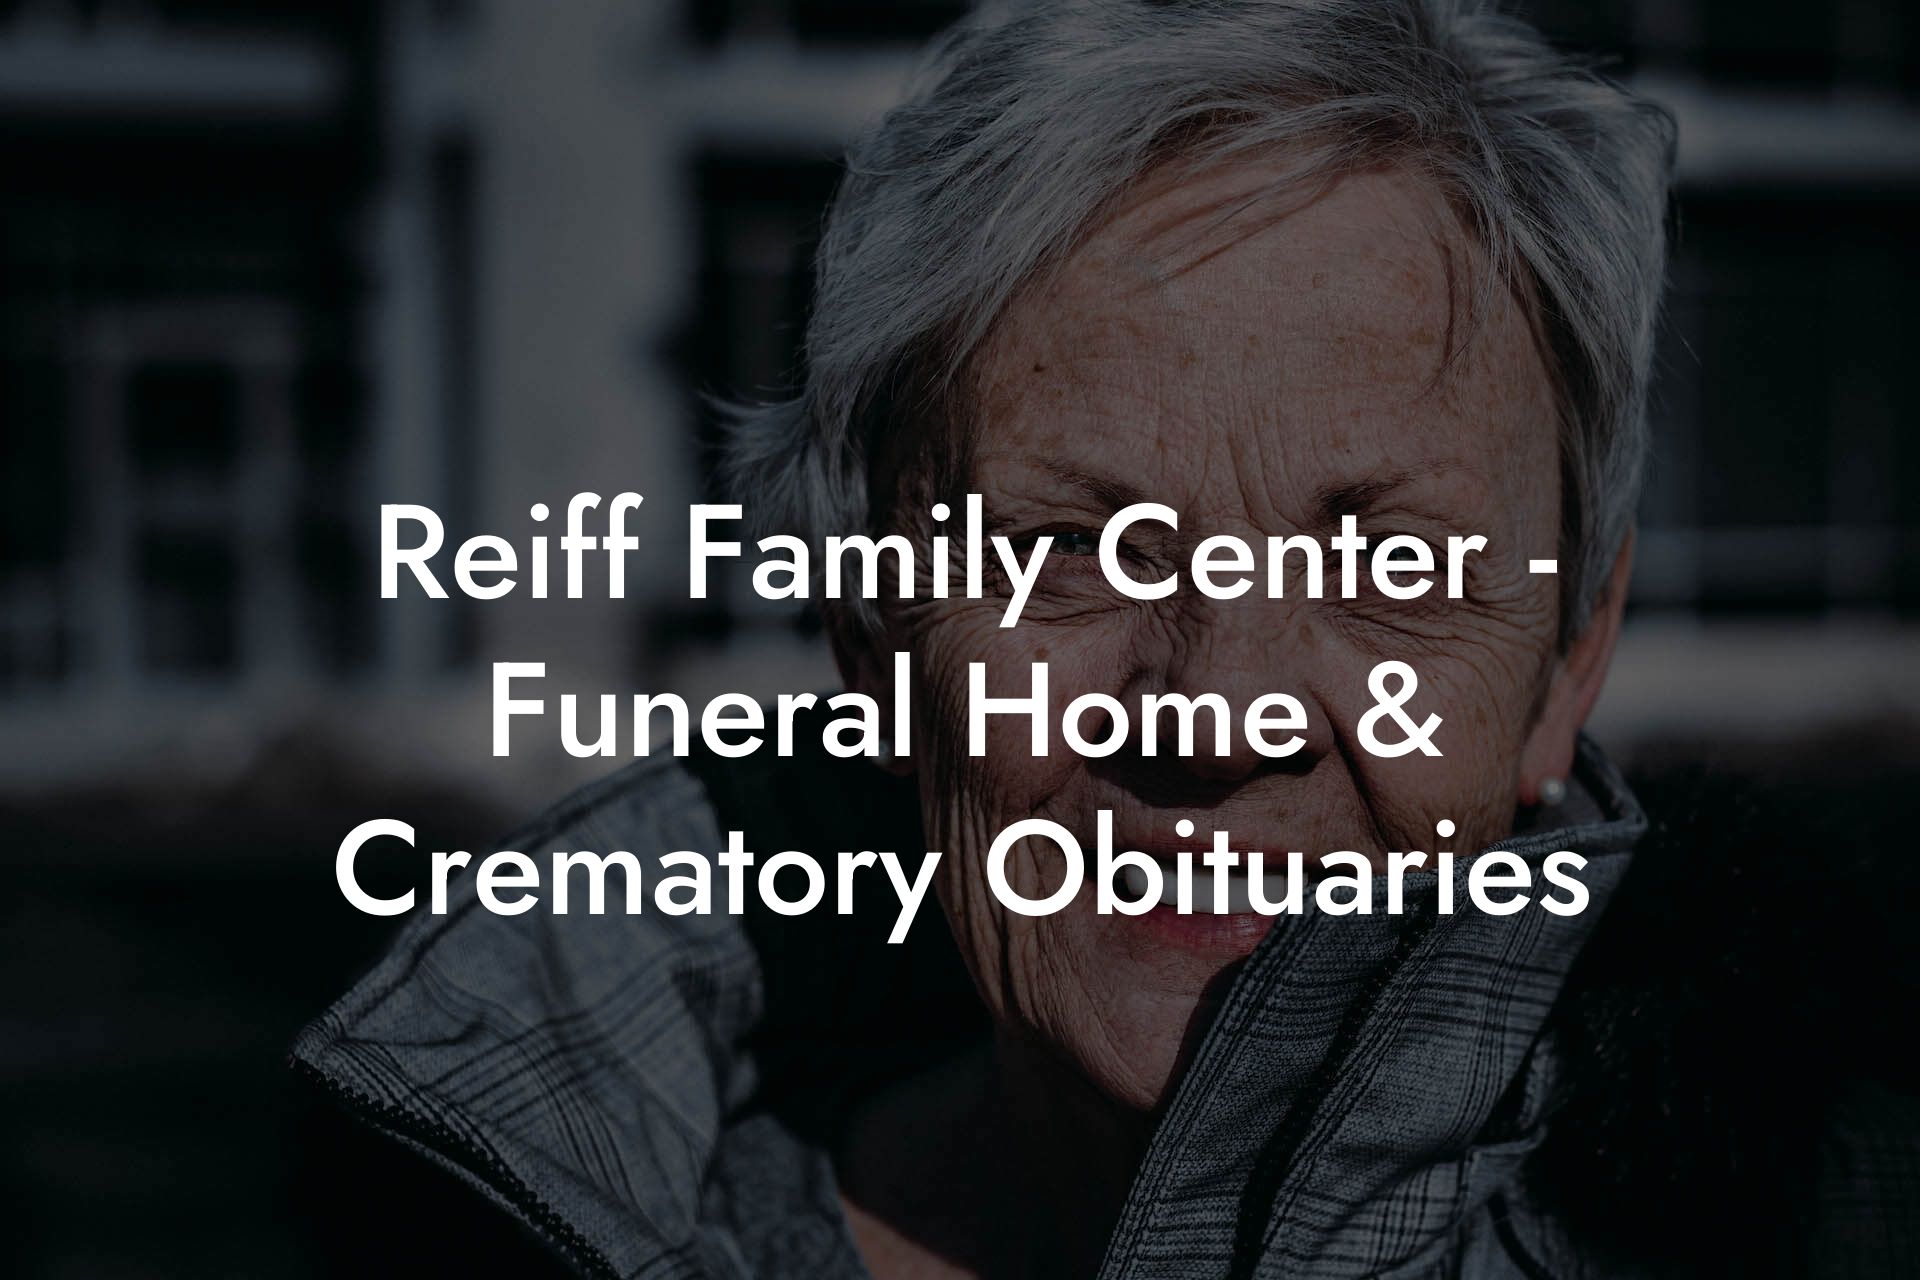 Reiff Family Center - Funeral Home & Crematory Obituaries